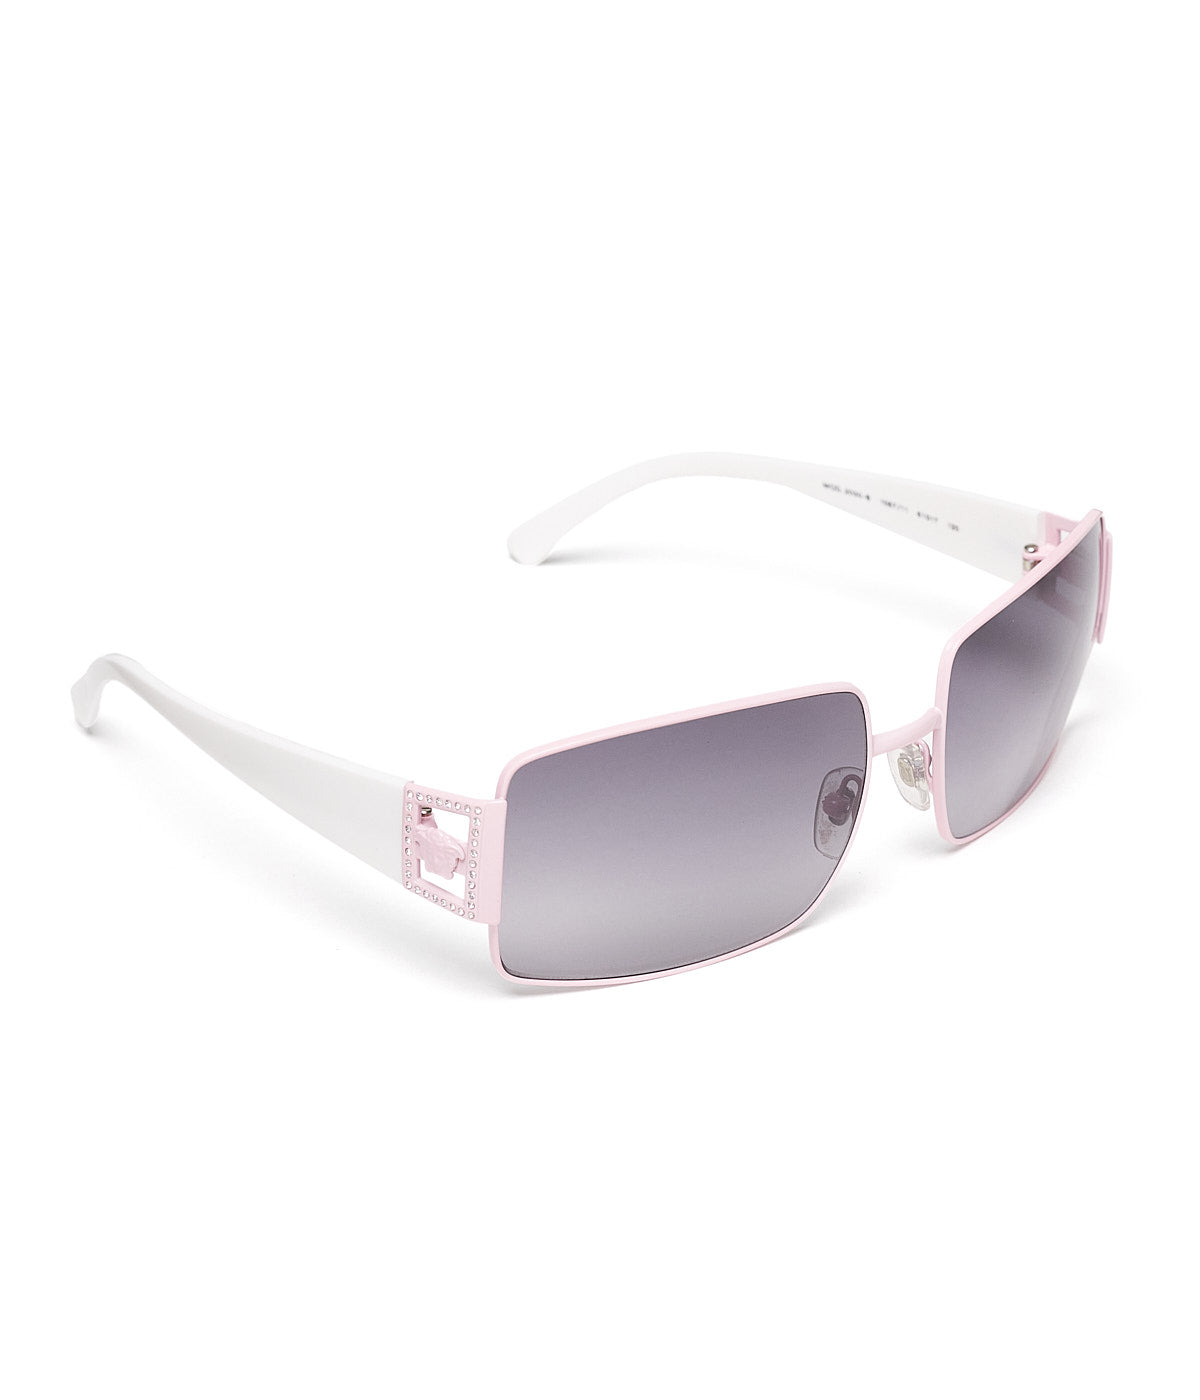 Pre-Owned Square Pink Rimmed Sunglasses